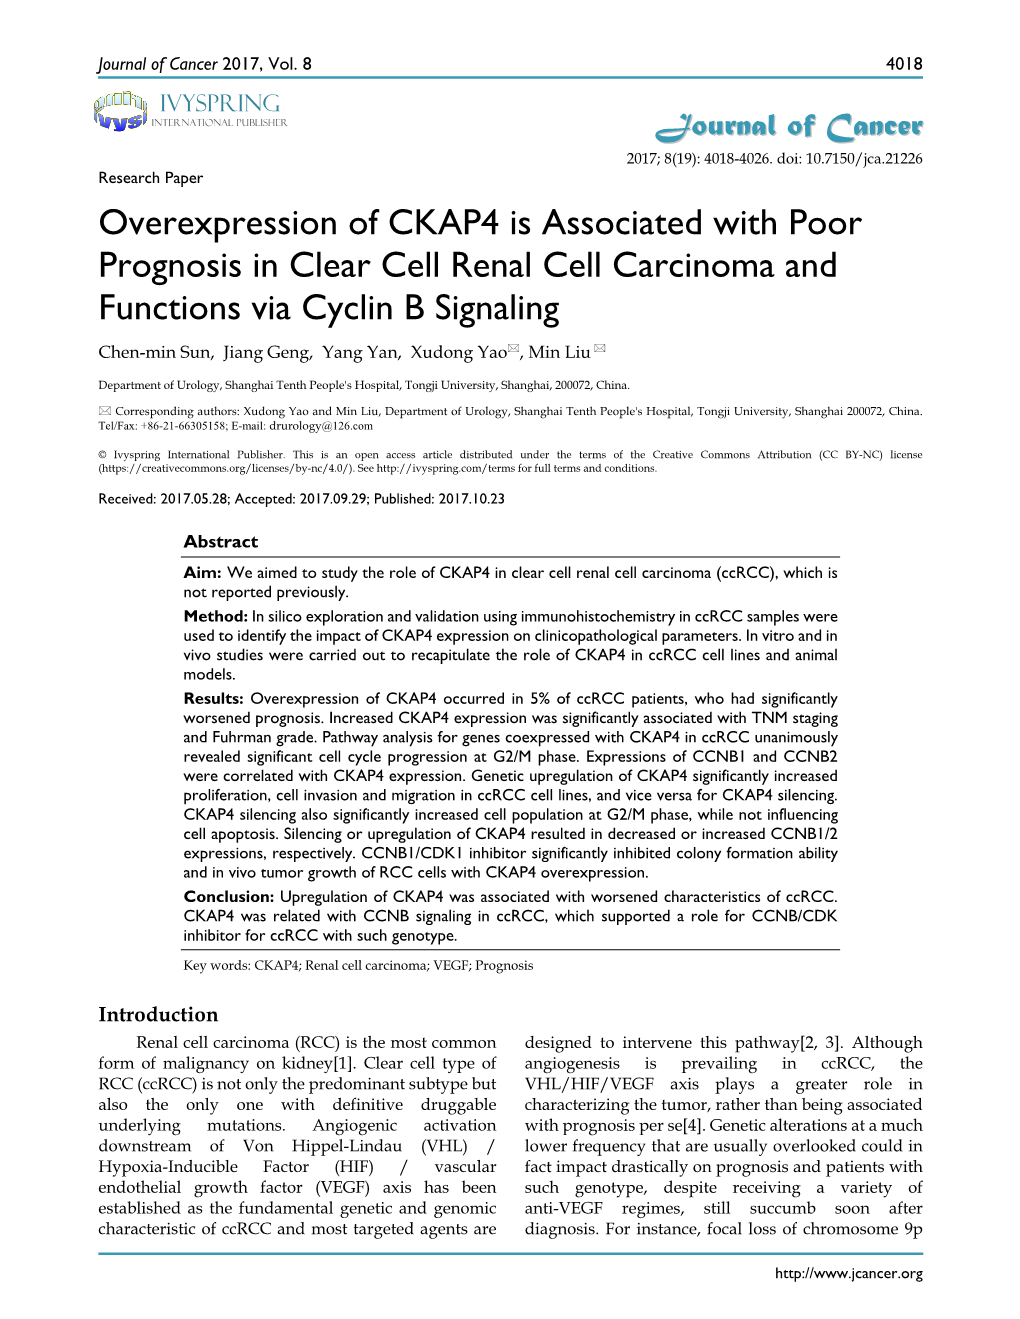 Overexpression of CKAP4 Is Associated with Poor Prognosis In